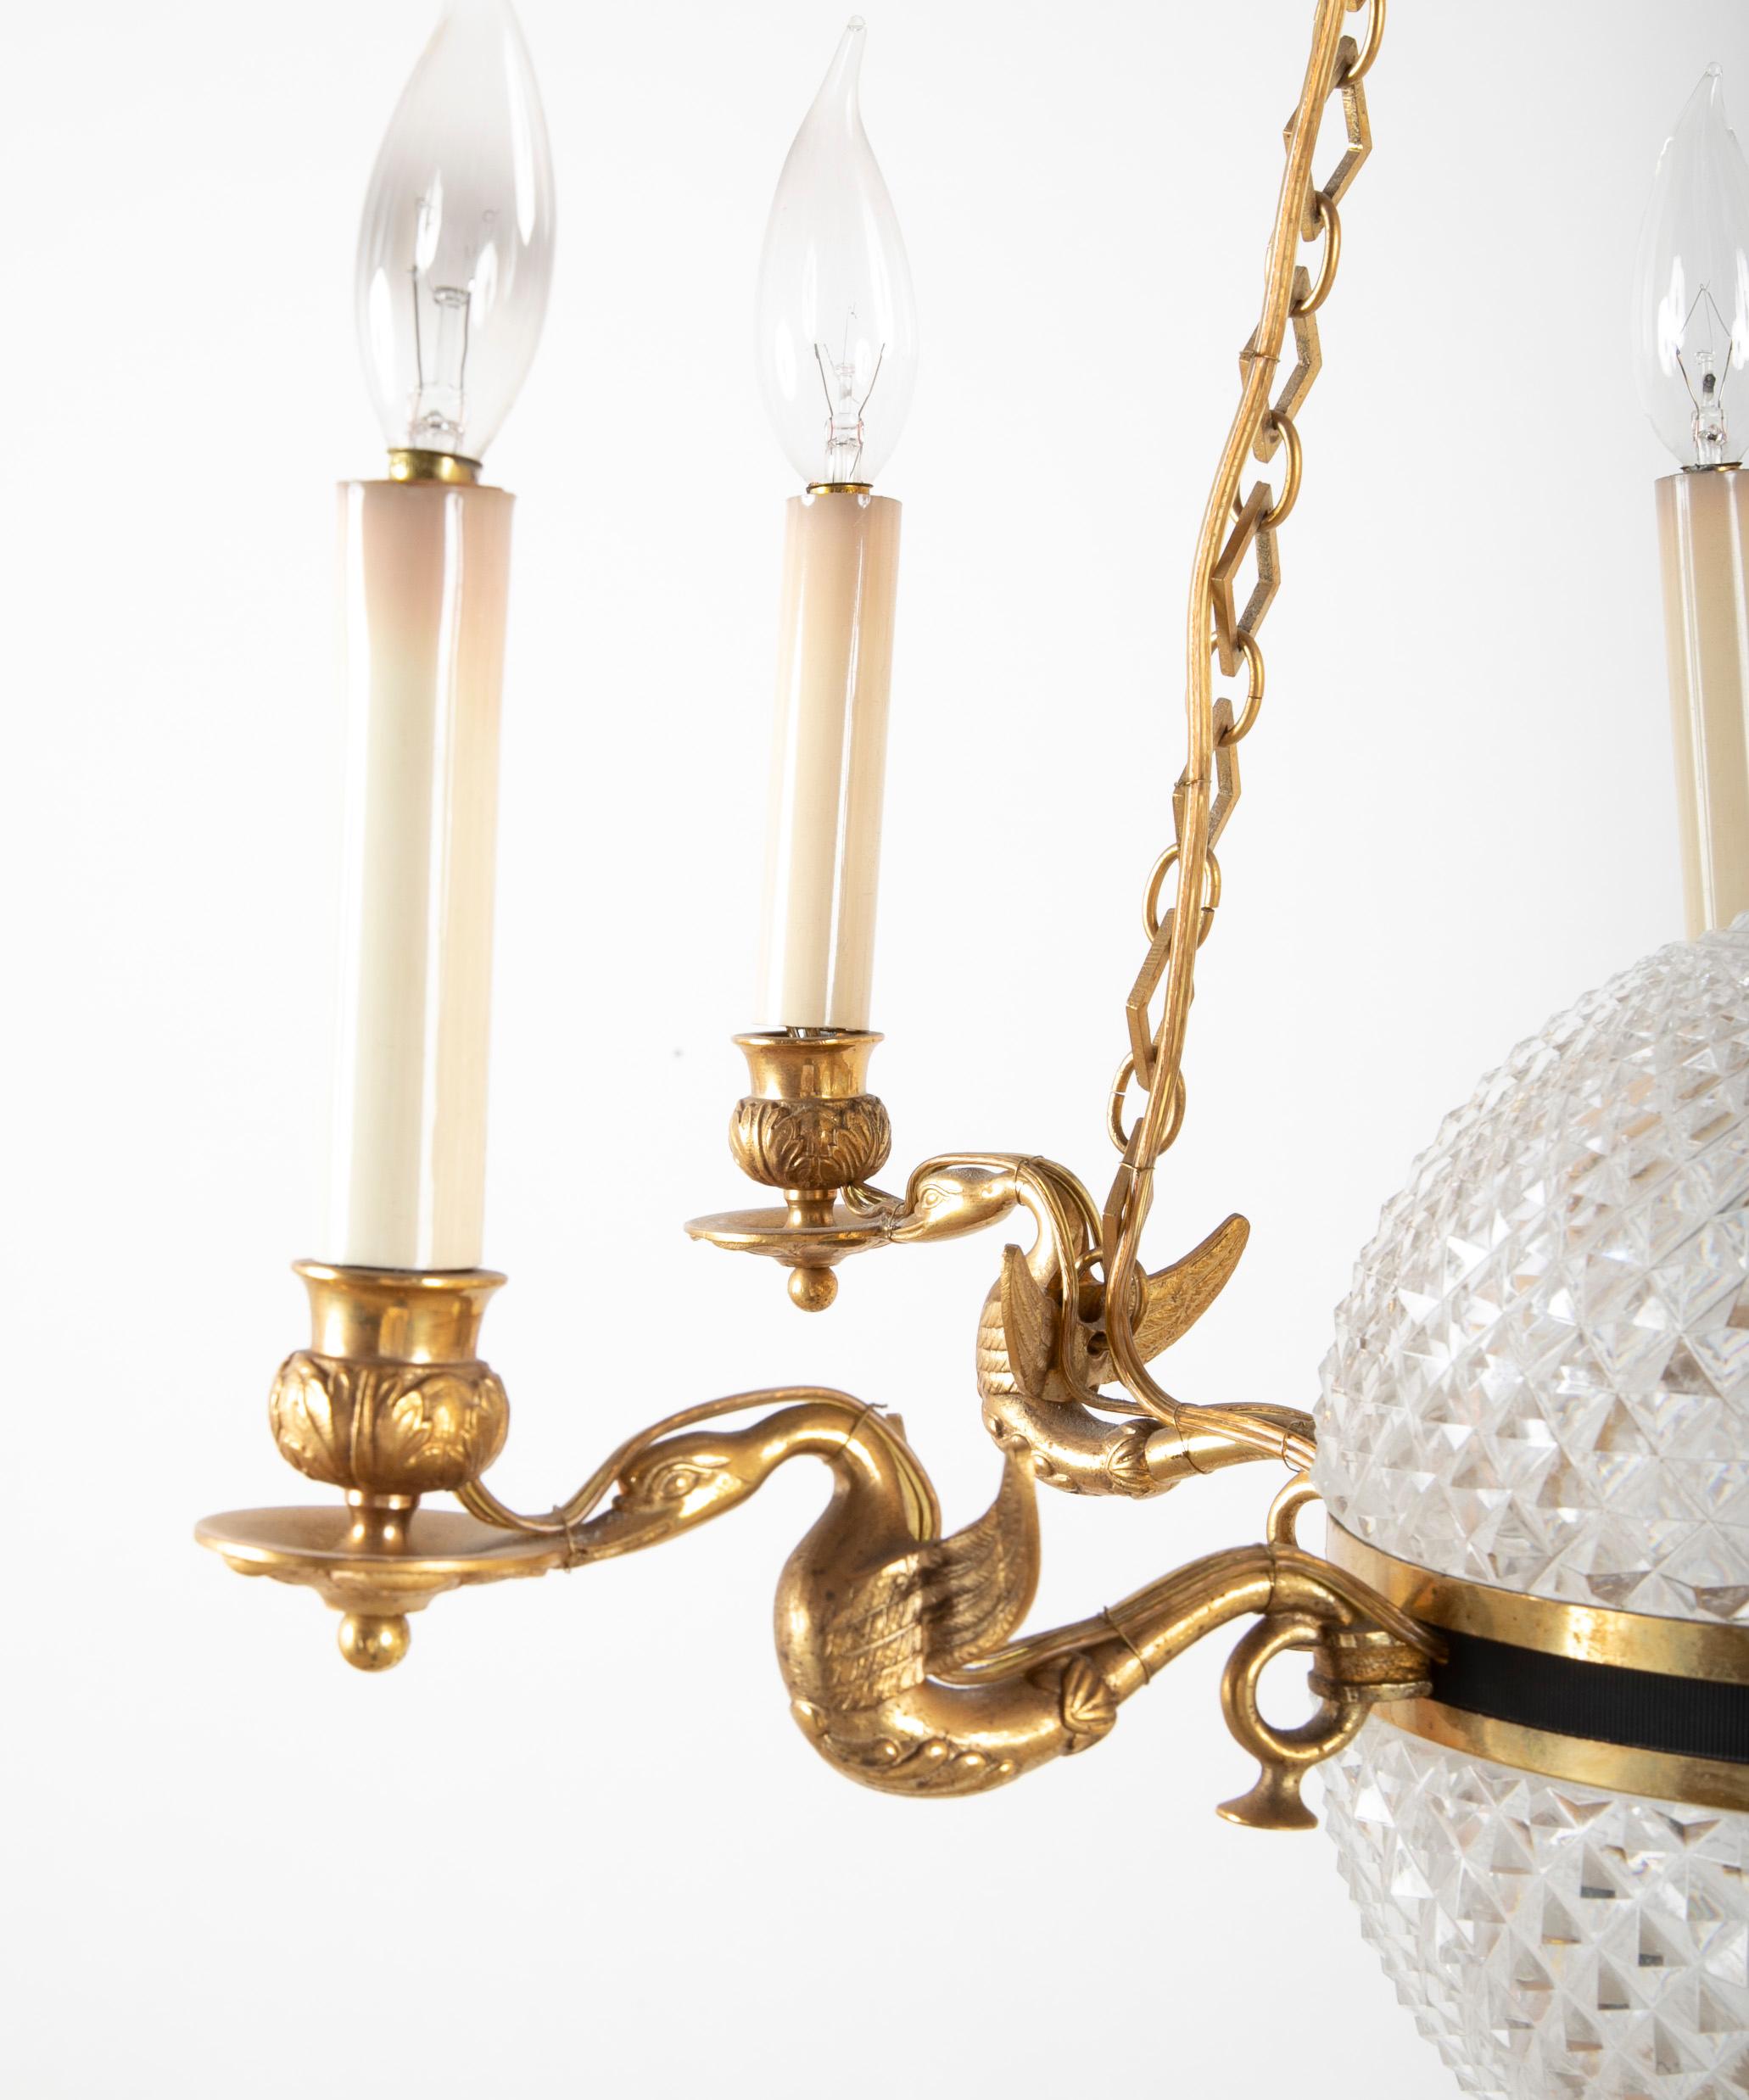 20th Century Cut Crystal Chandelier with Central Globe, Swan Arms and Elaborate Crown